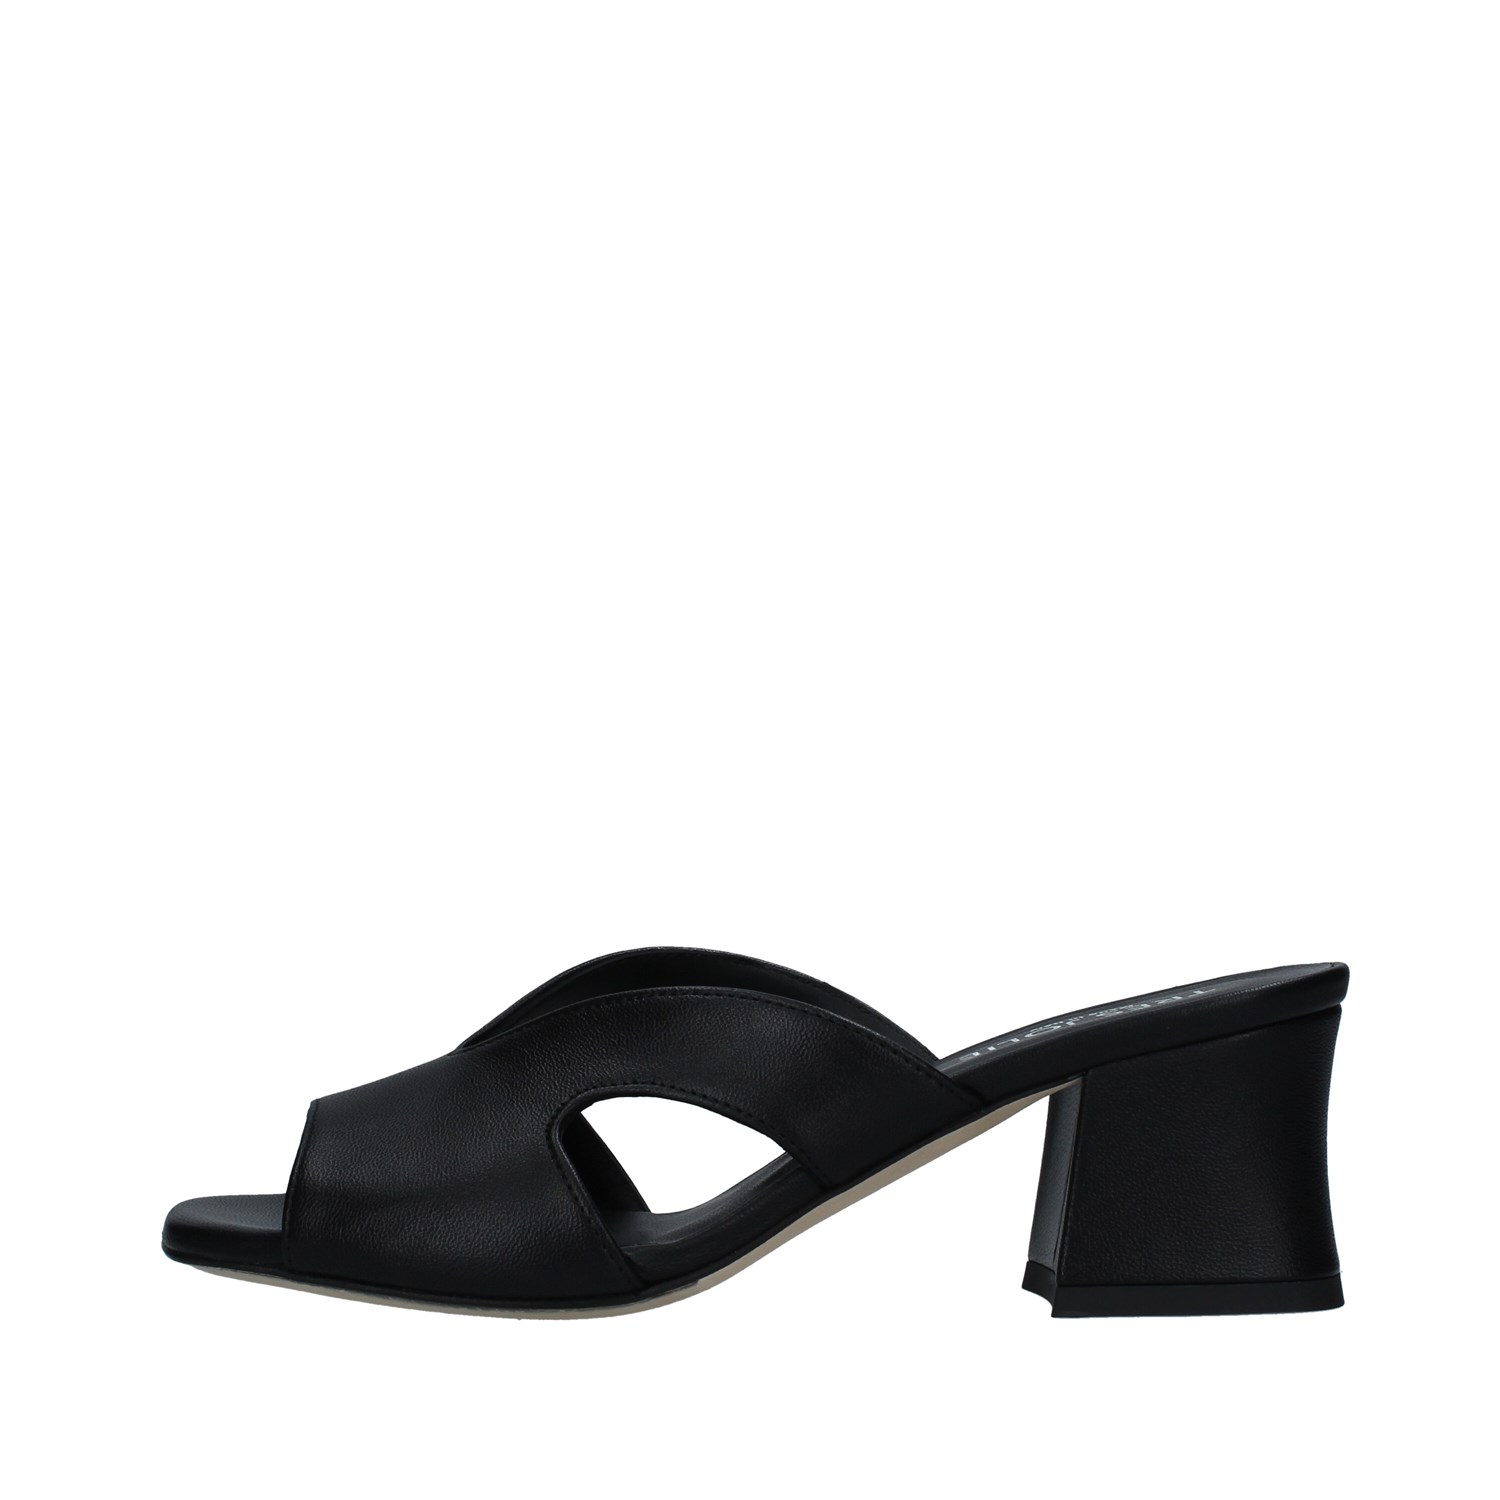 Tres Jolie Shoes Woman With heel BLACK 2183/ARIA